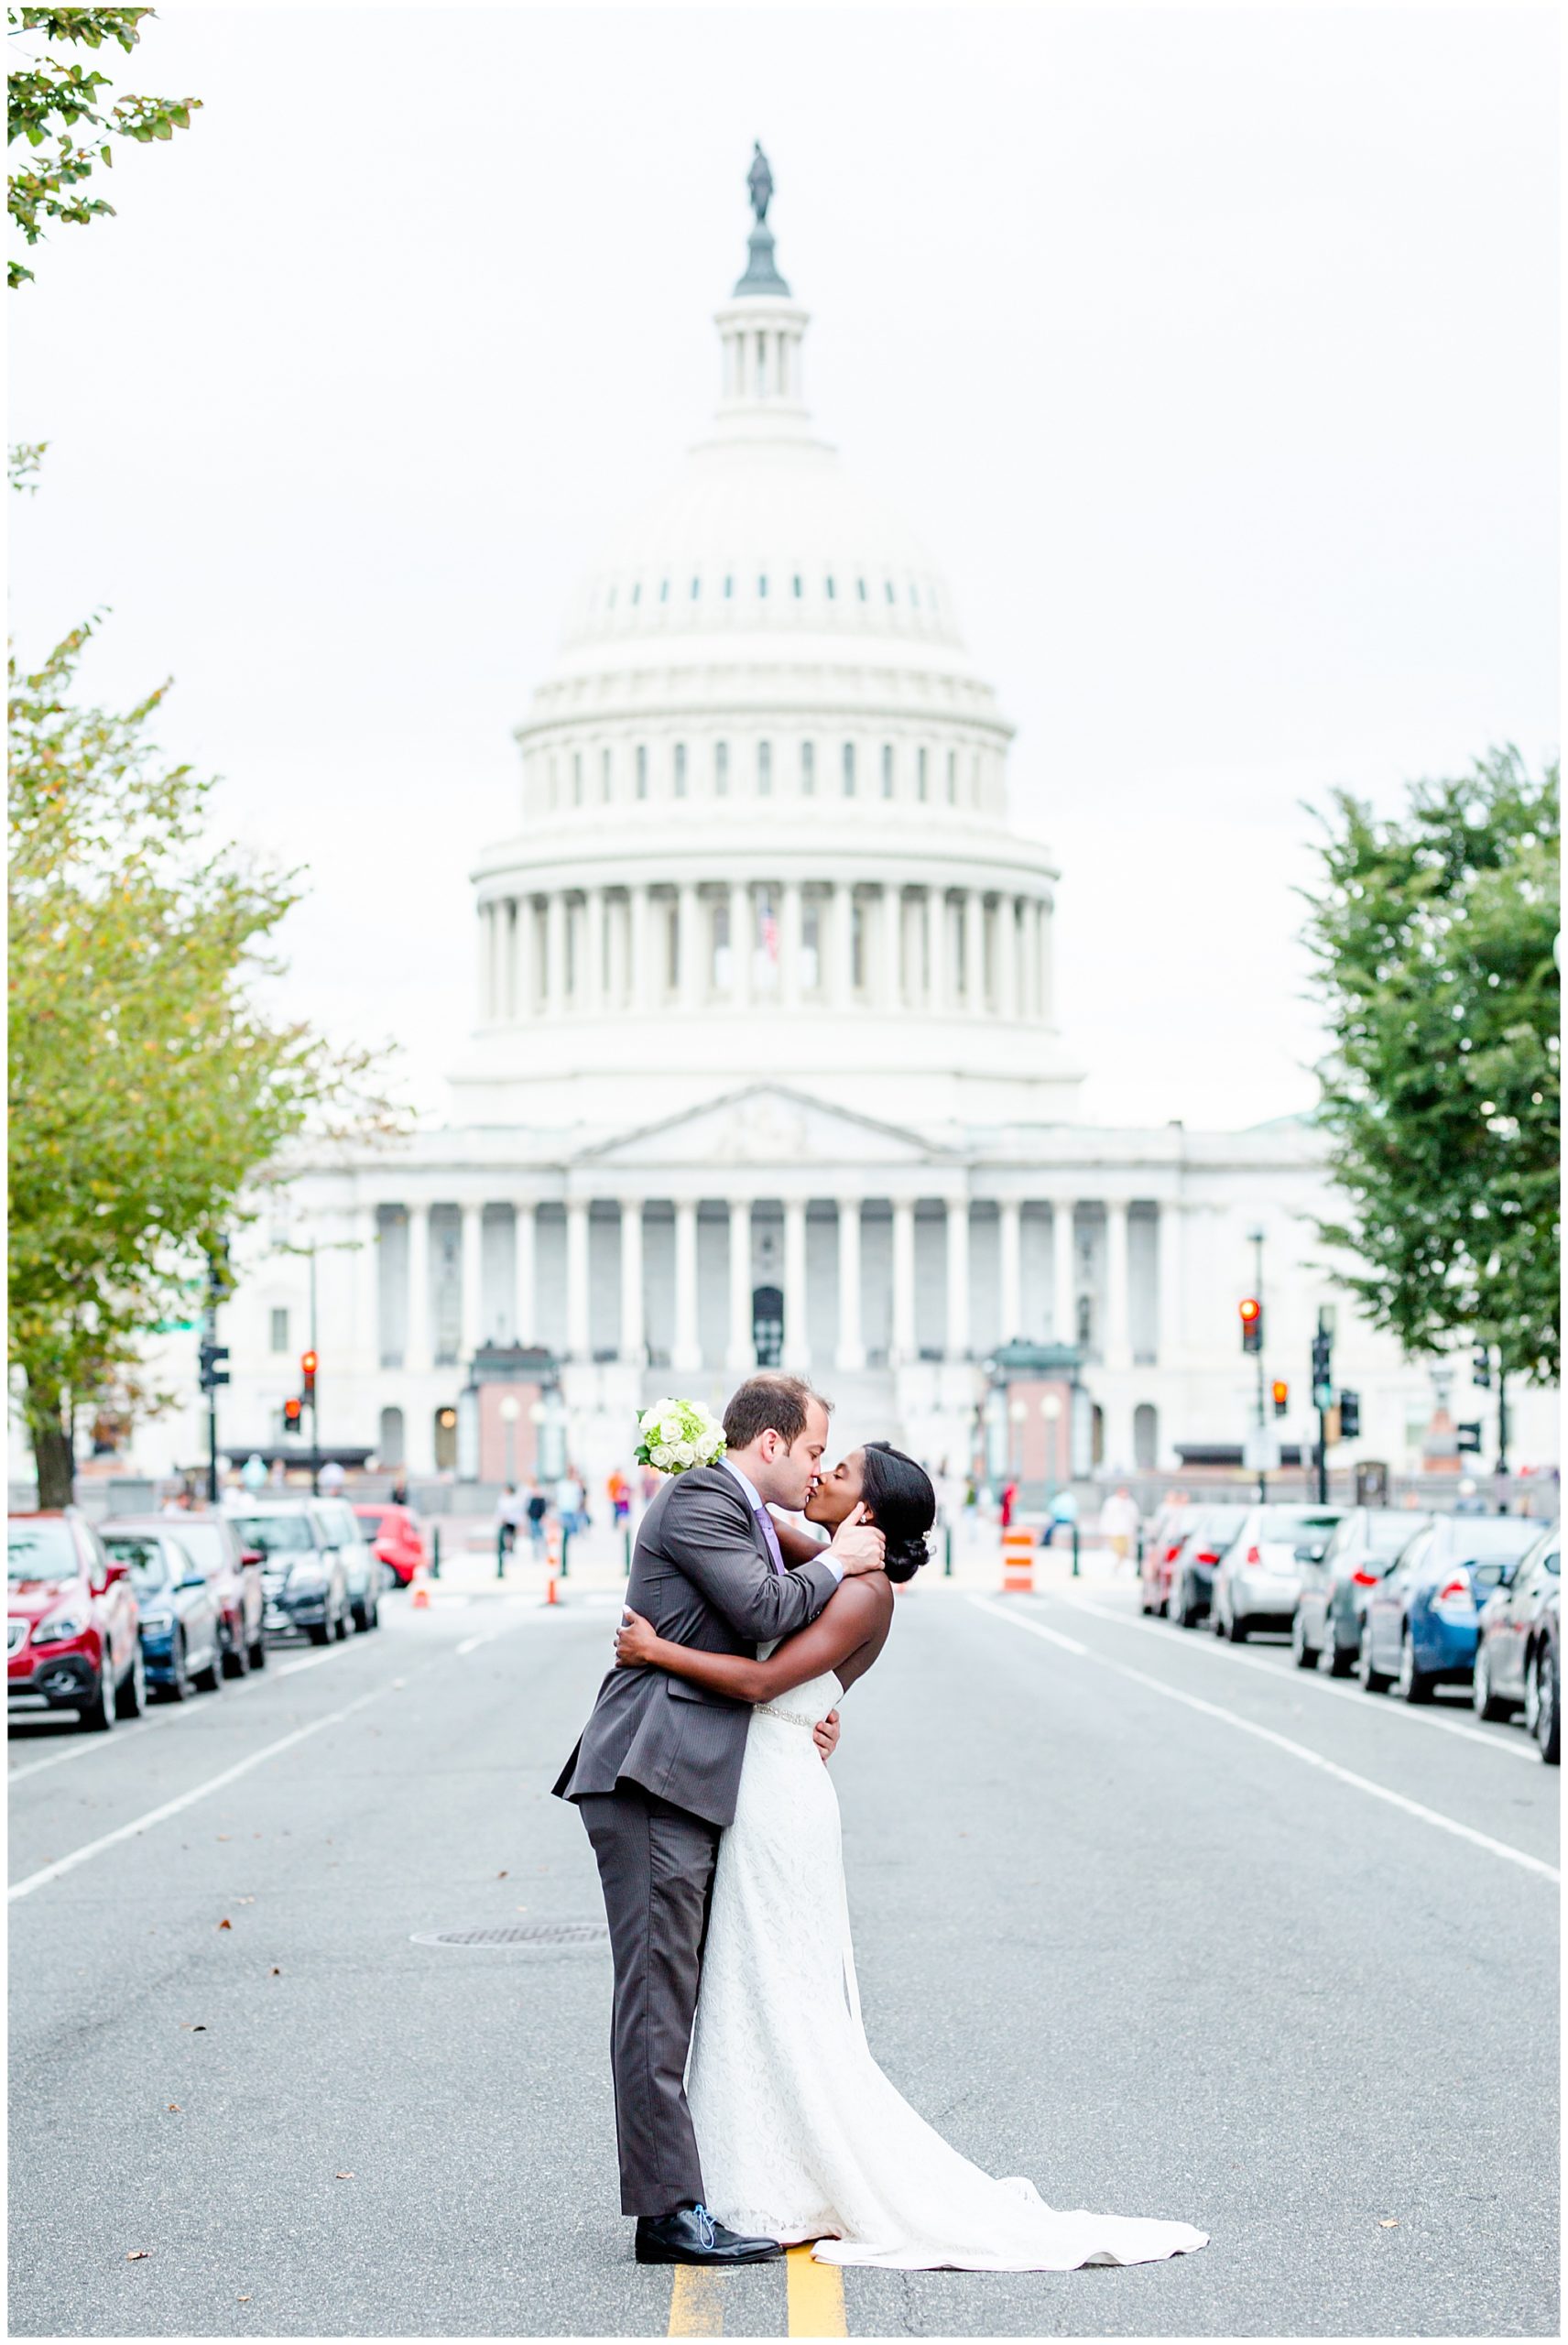 3 tips to up-level your elopement, D.C. elopement, DC micro wedding, DC wedding photographer, DC wedding, DC photographer, small wedding ideas, Rachel E.H. Photographer, MD wedding photographer, Baltimore wedding photographer, VA wedding photographer, Capitol Hill wedding